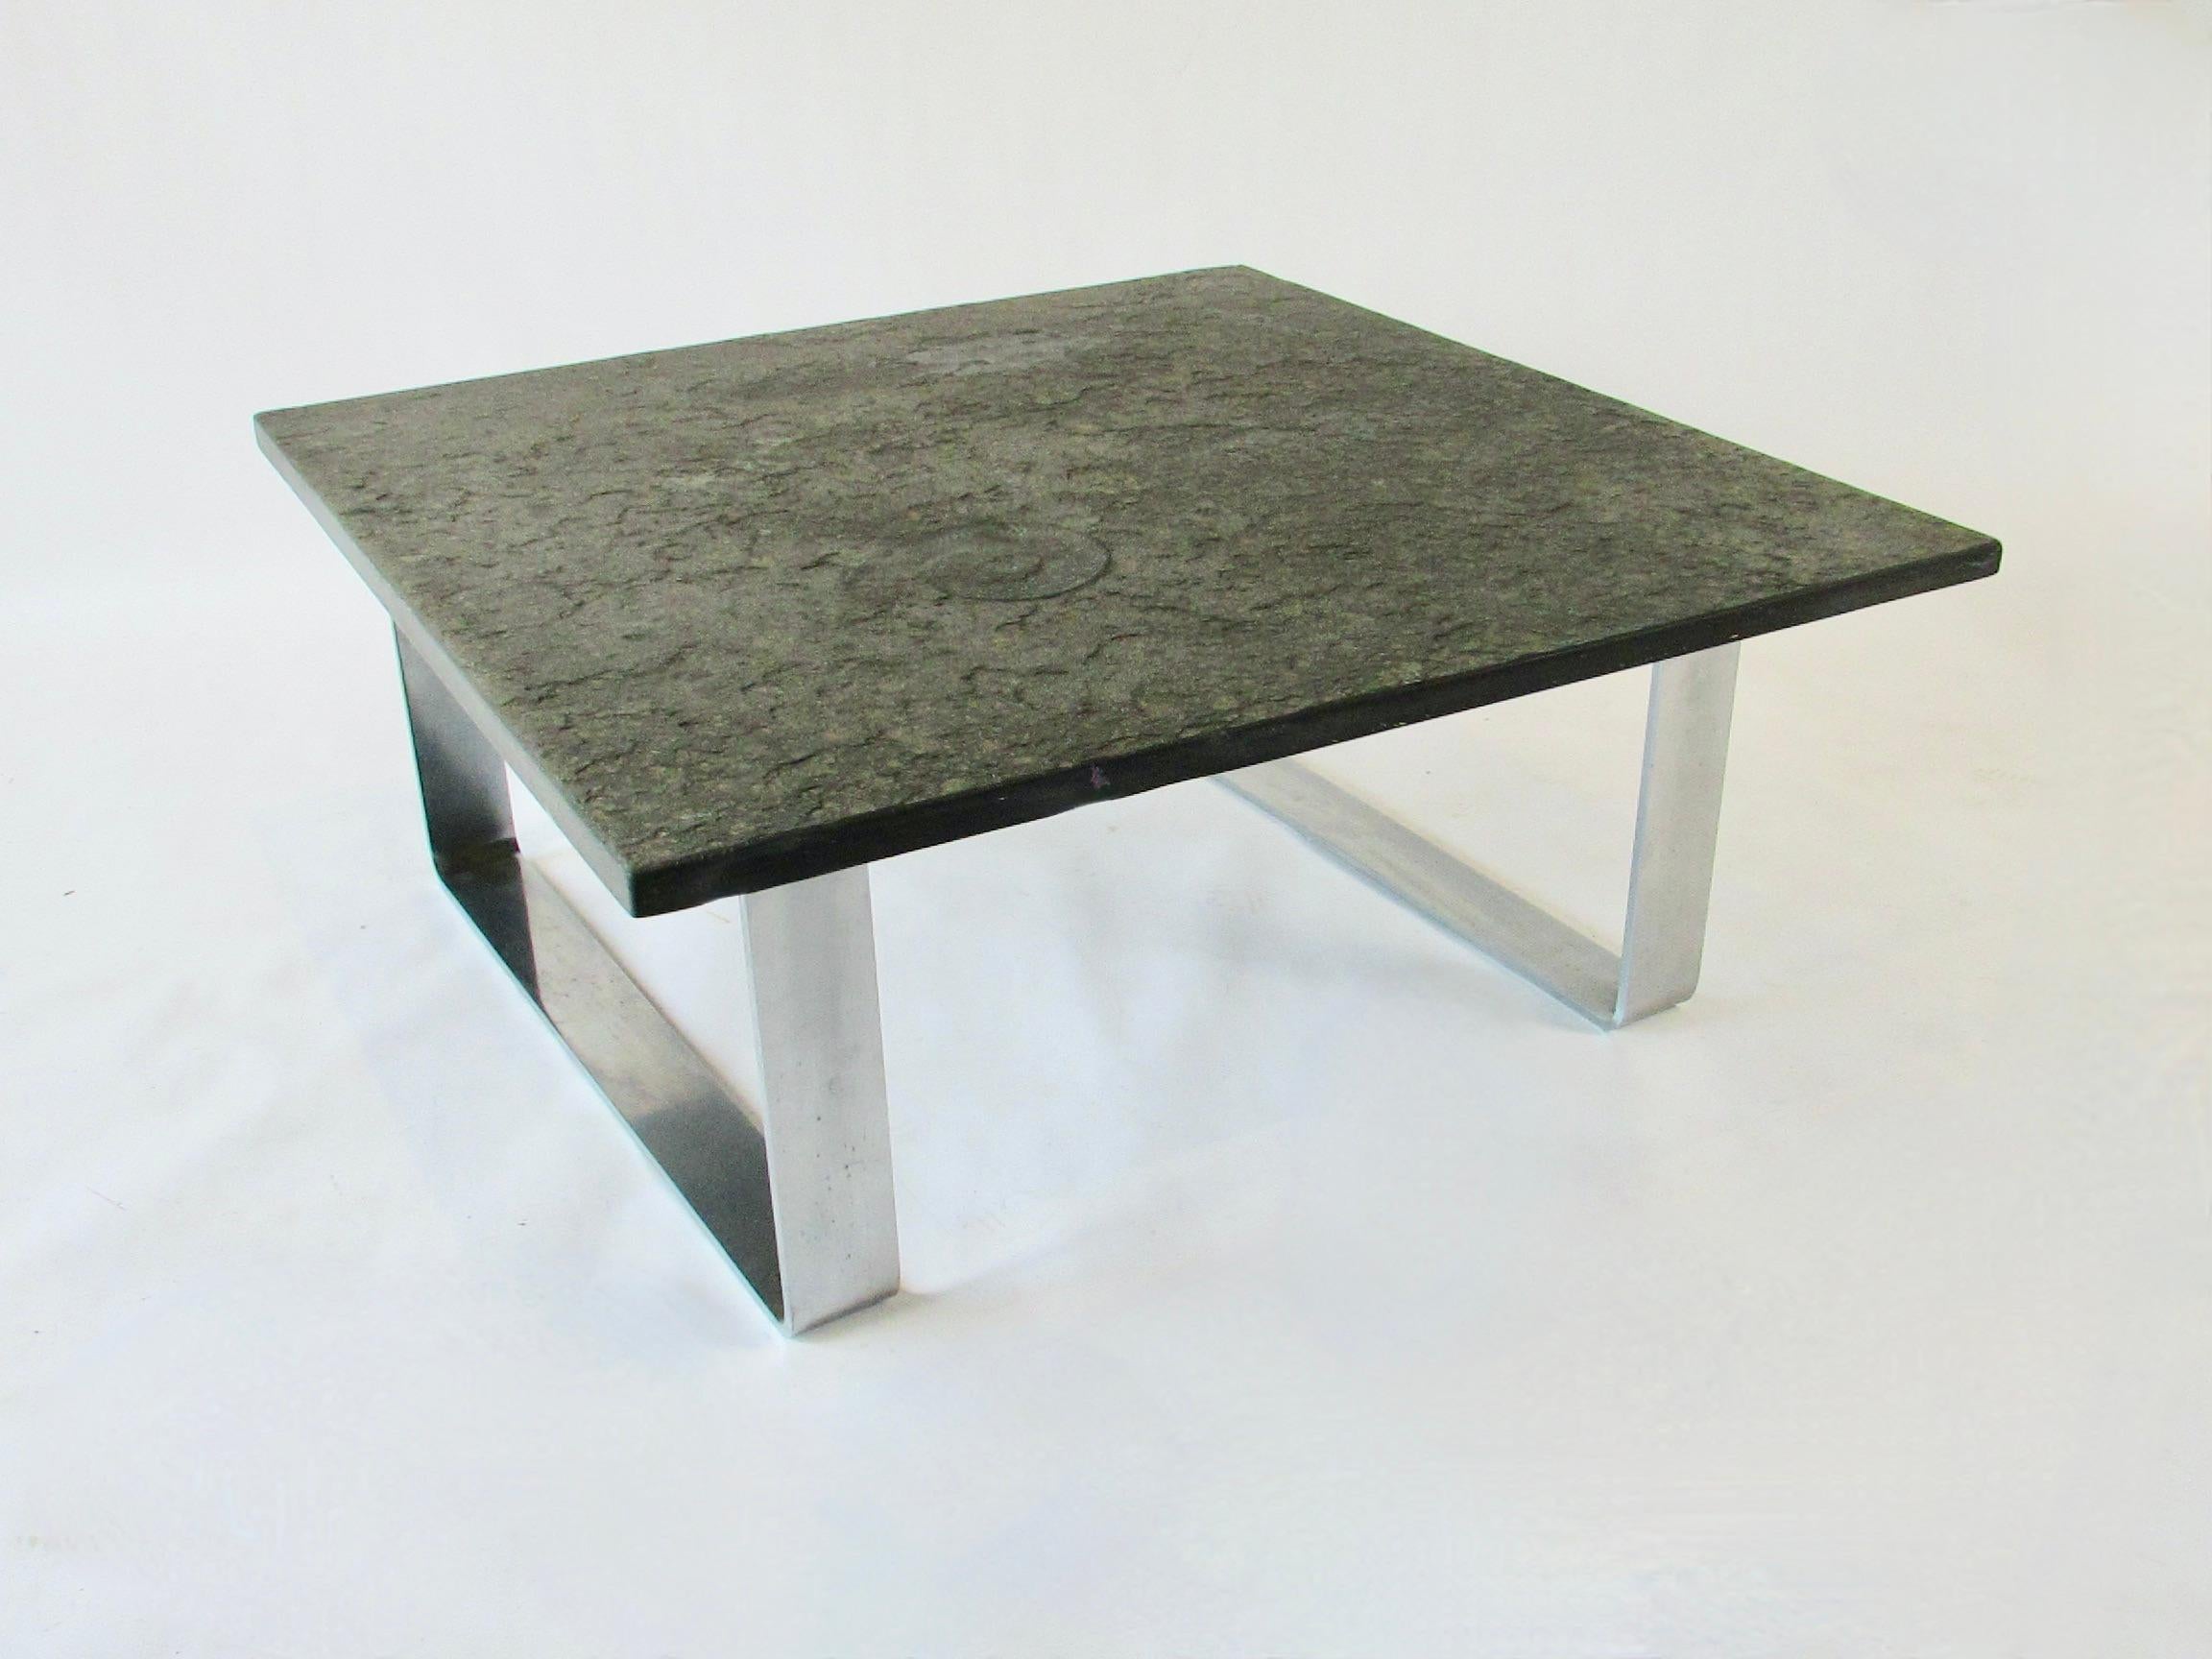 Thick slate top table with Ammonite fossil on chrome base For Sale 3